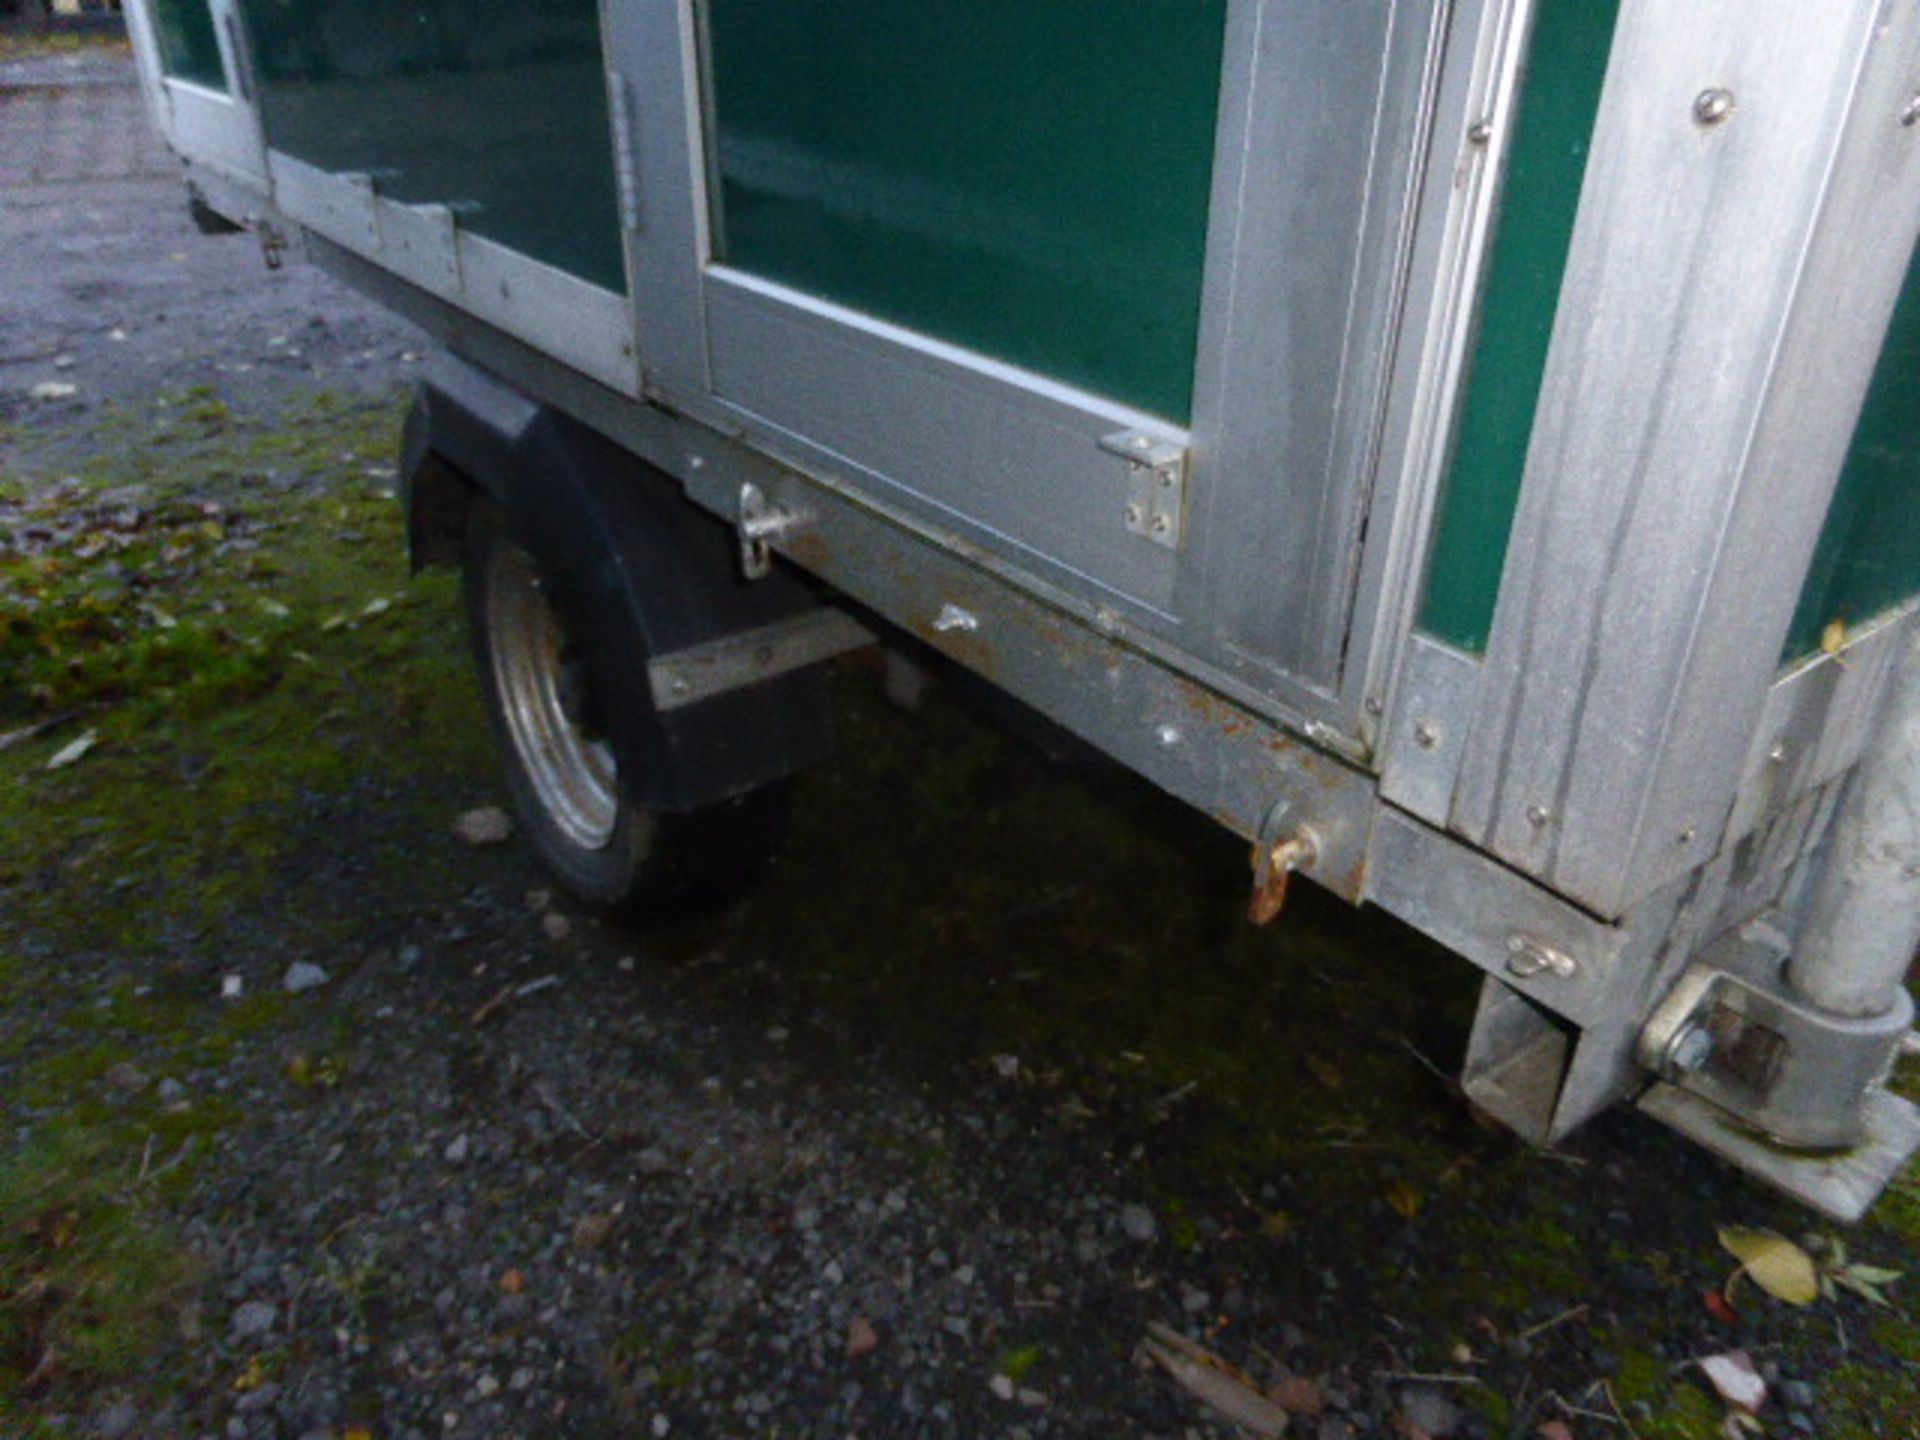 Belmont luxury 1 + 1 toilet trailer on single axle by Premier Mobile (code BEL1) With aluminium - Image 8 of 11